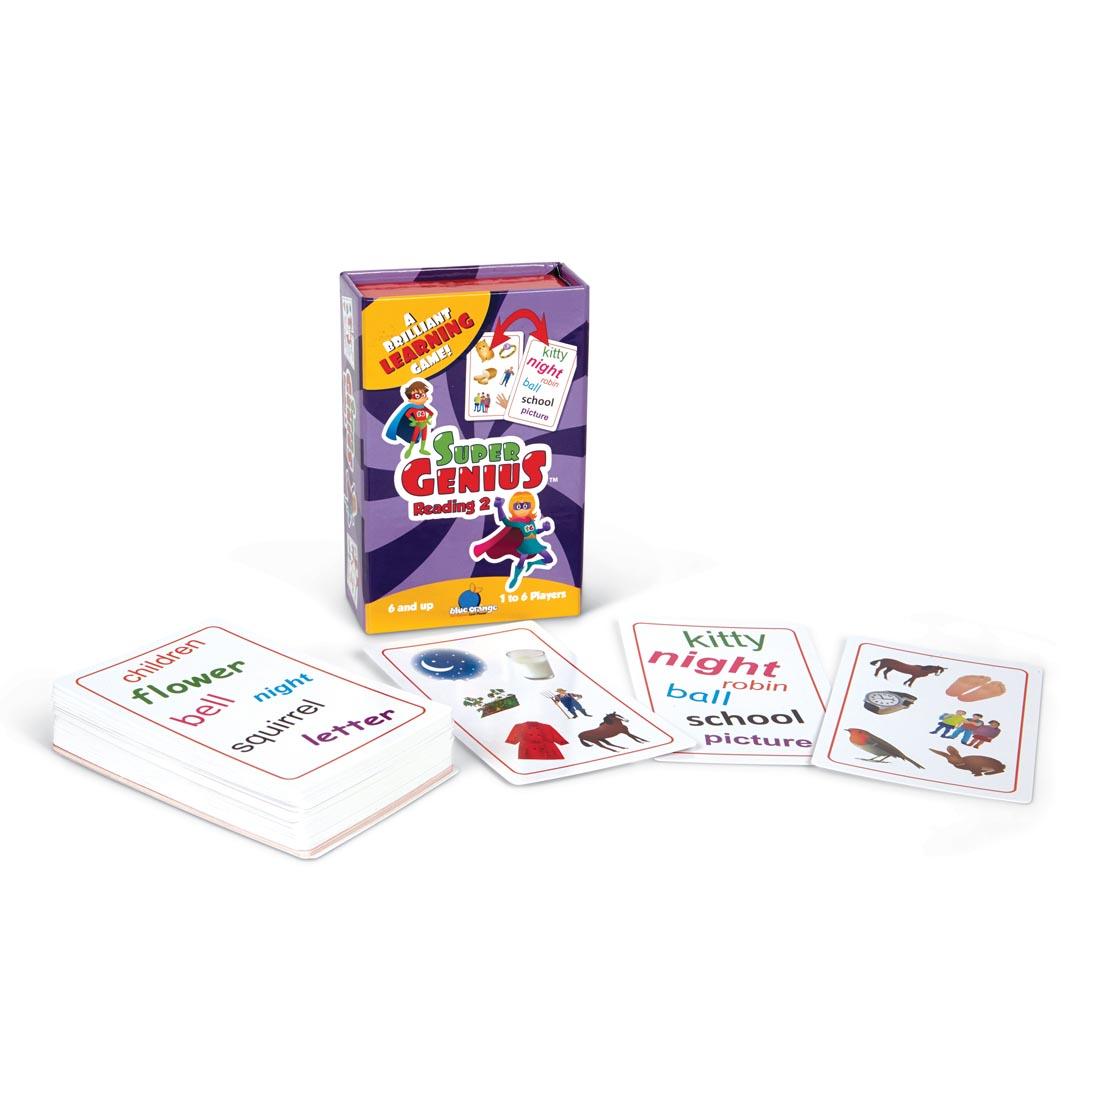 Stack of Cards and Package from Super Genius Reading 2 Matching Game